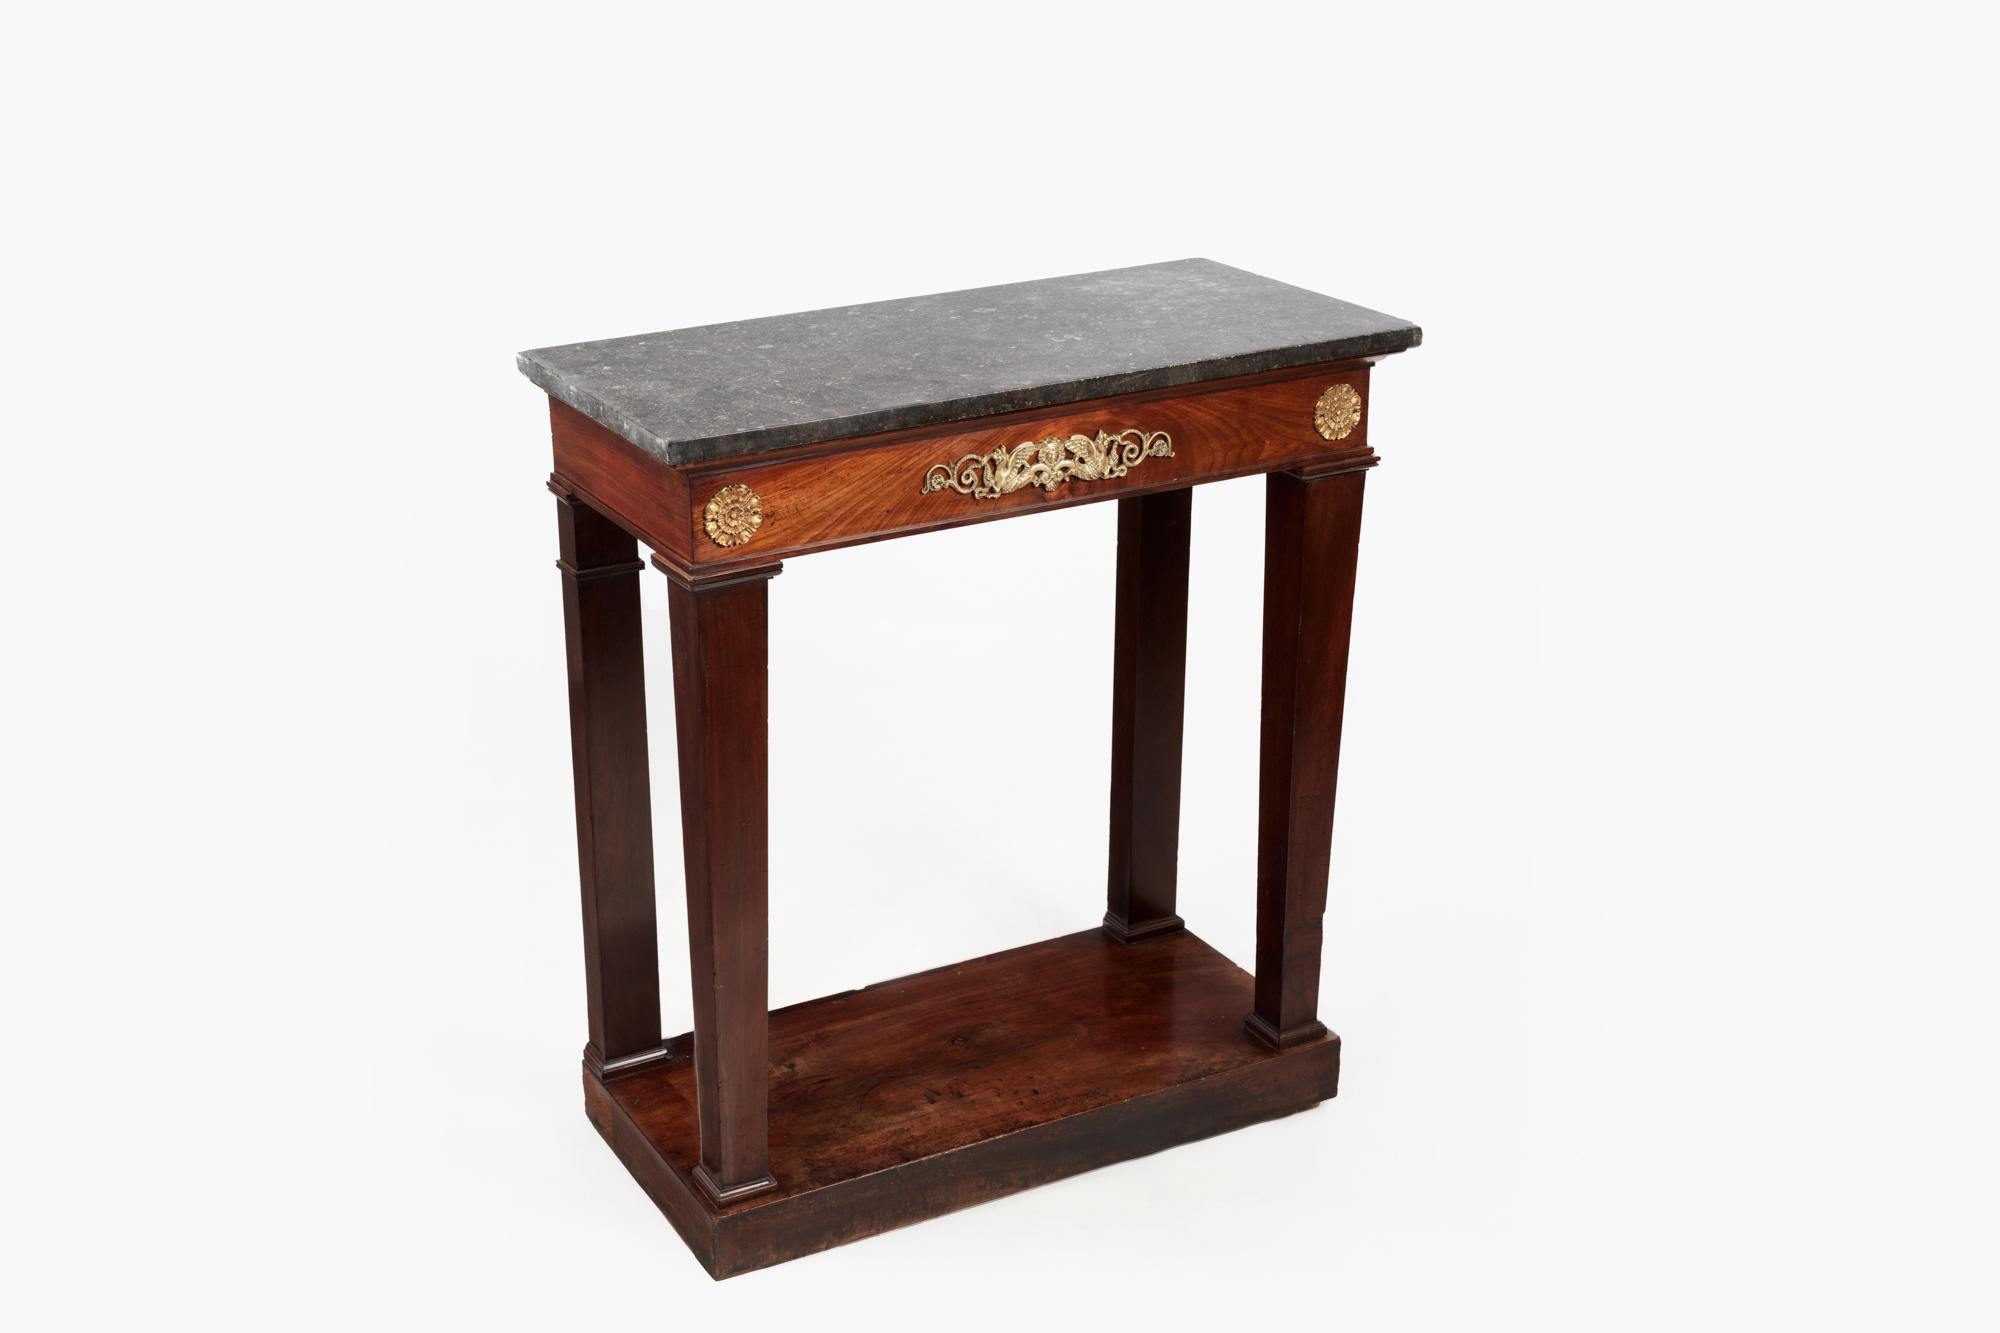 Irish 19th Century Regency Console Table with Black Marble Top